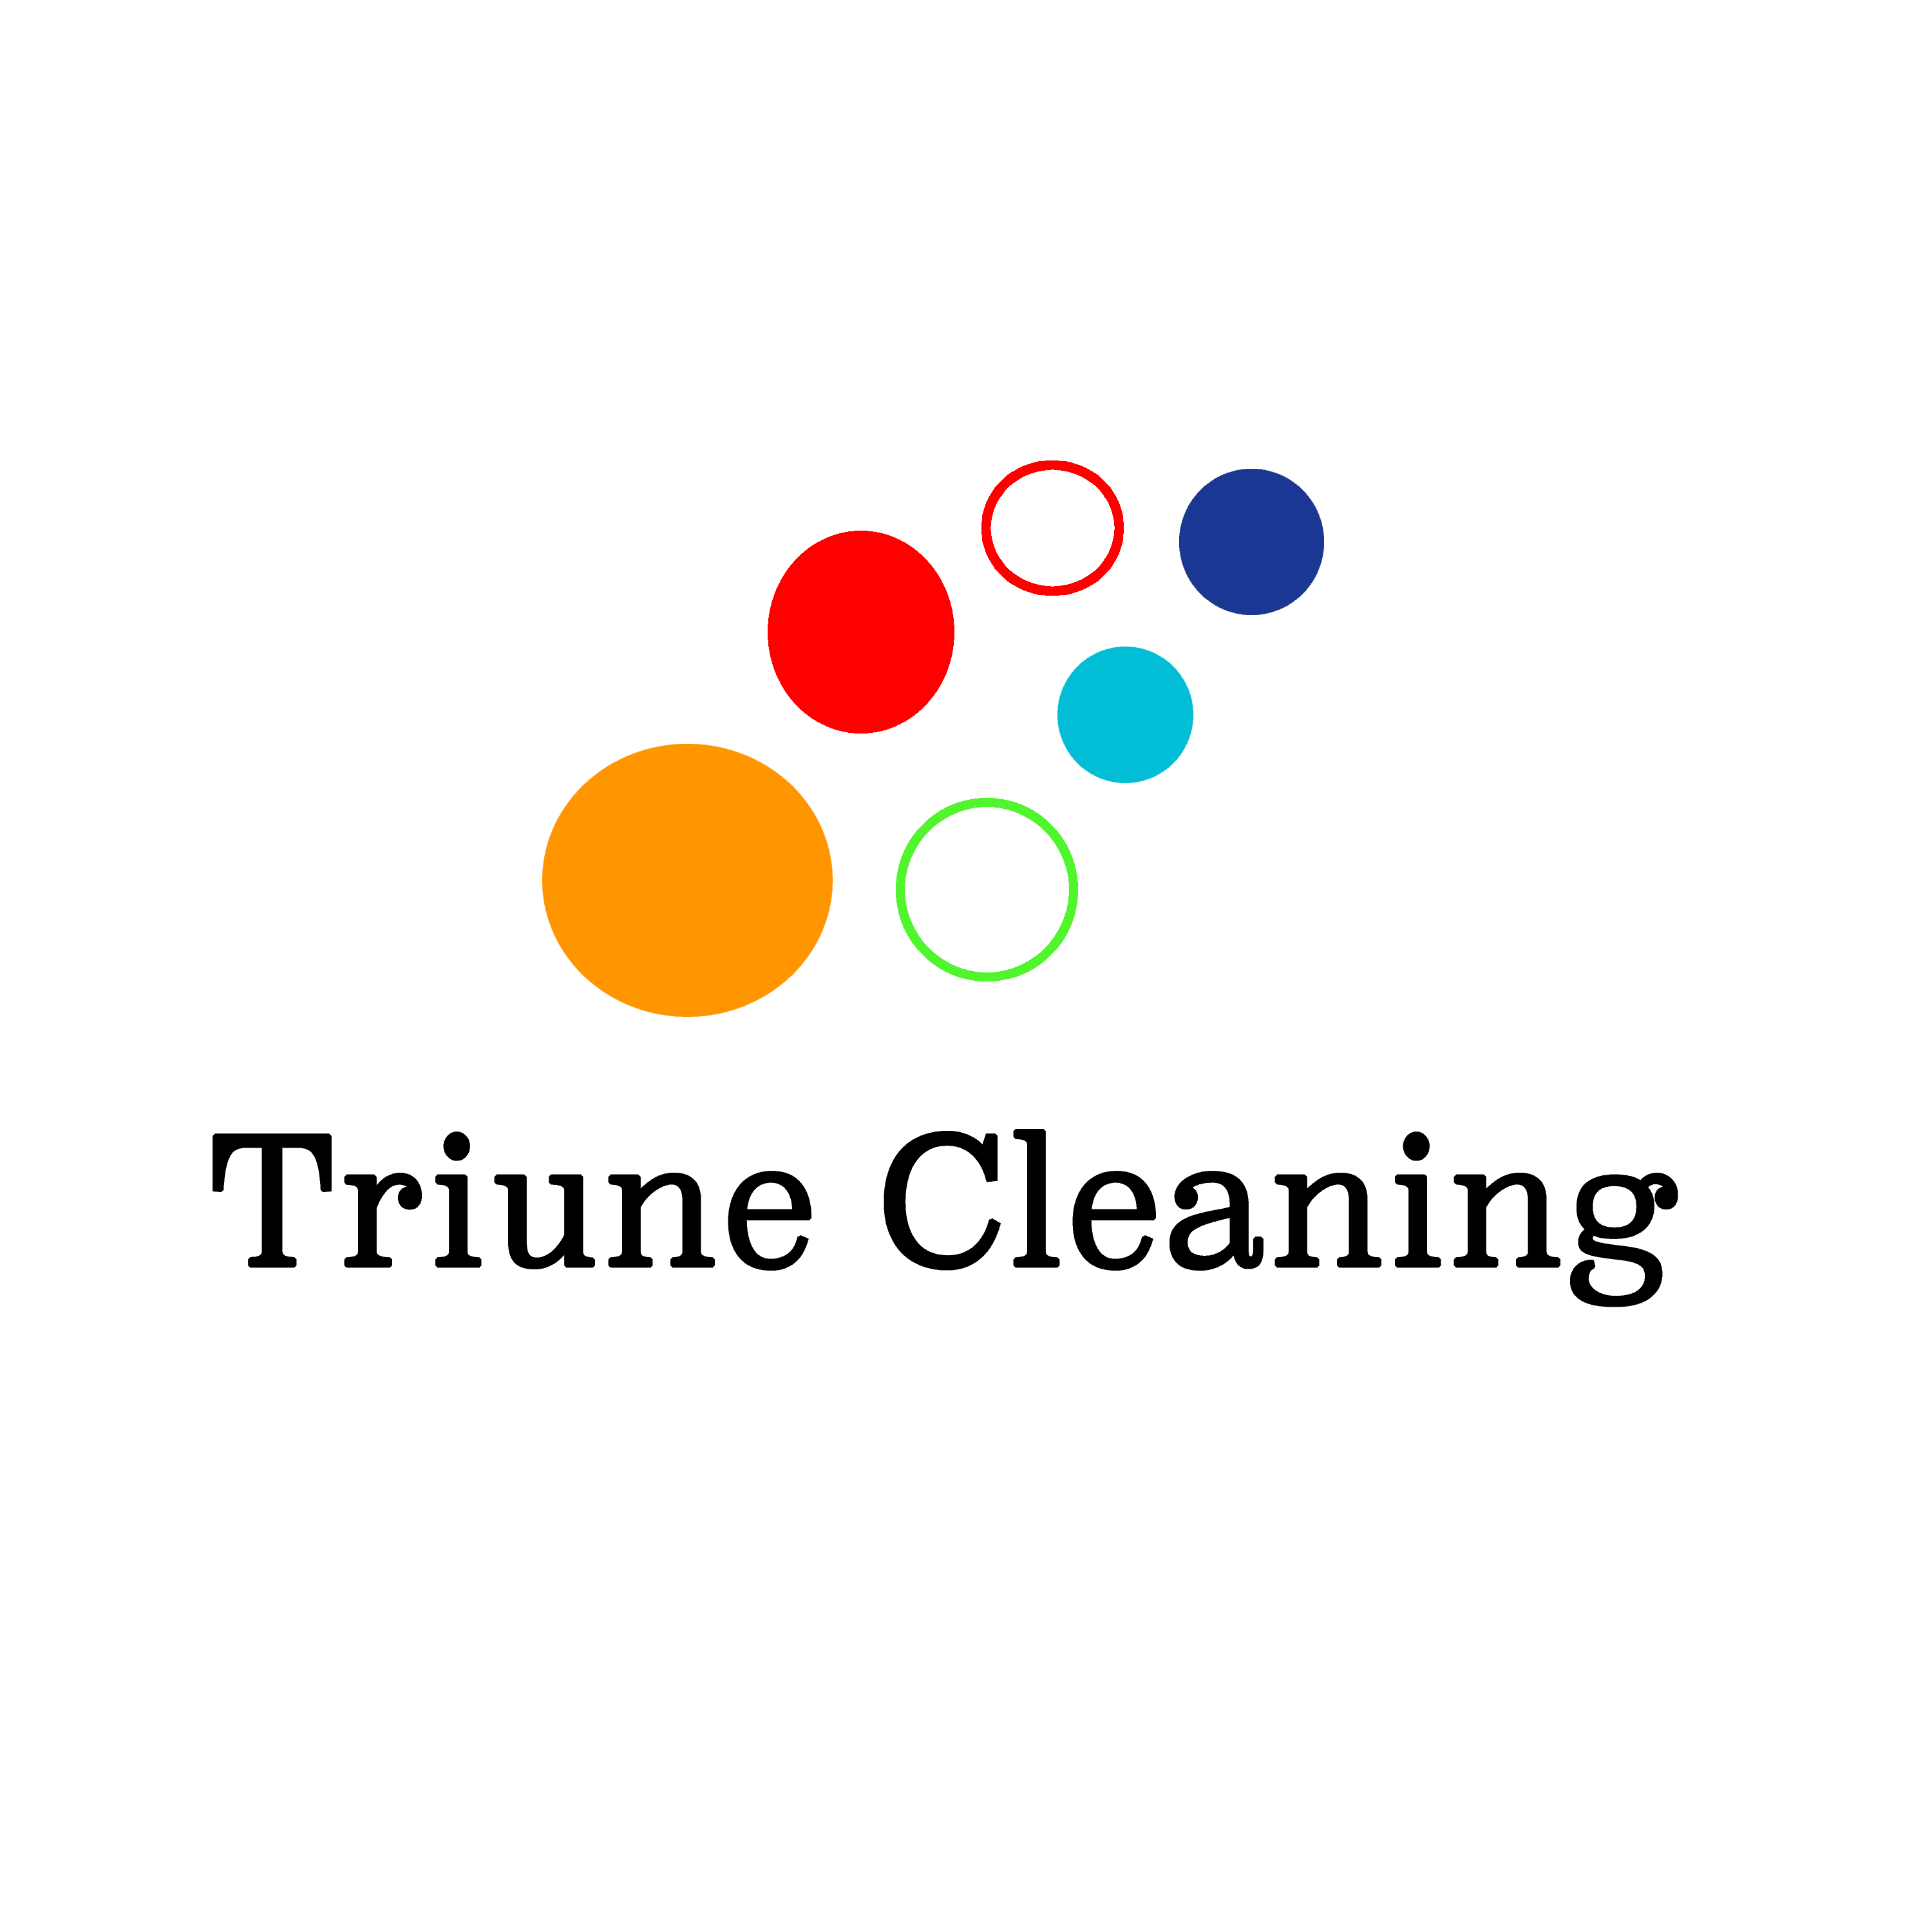 Triune Cleaning